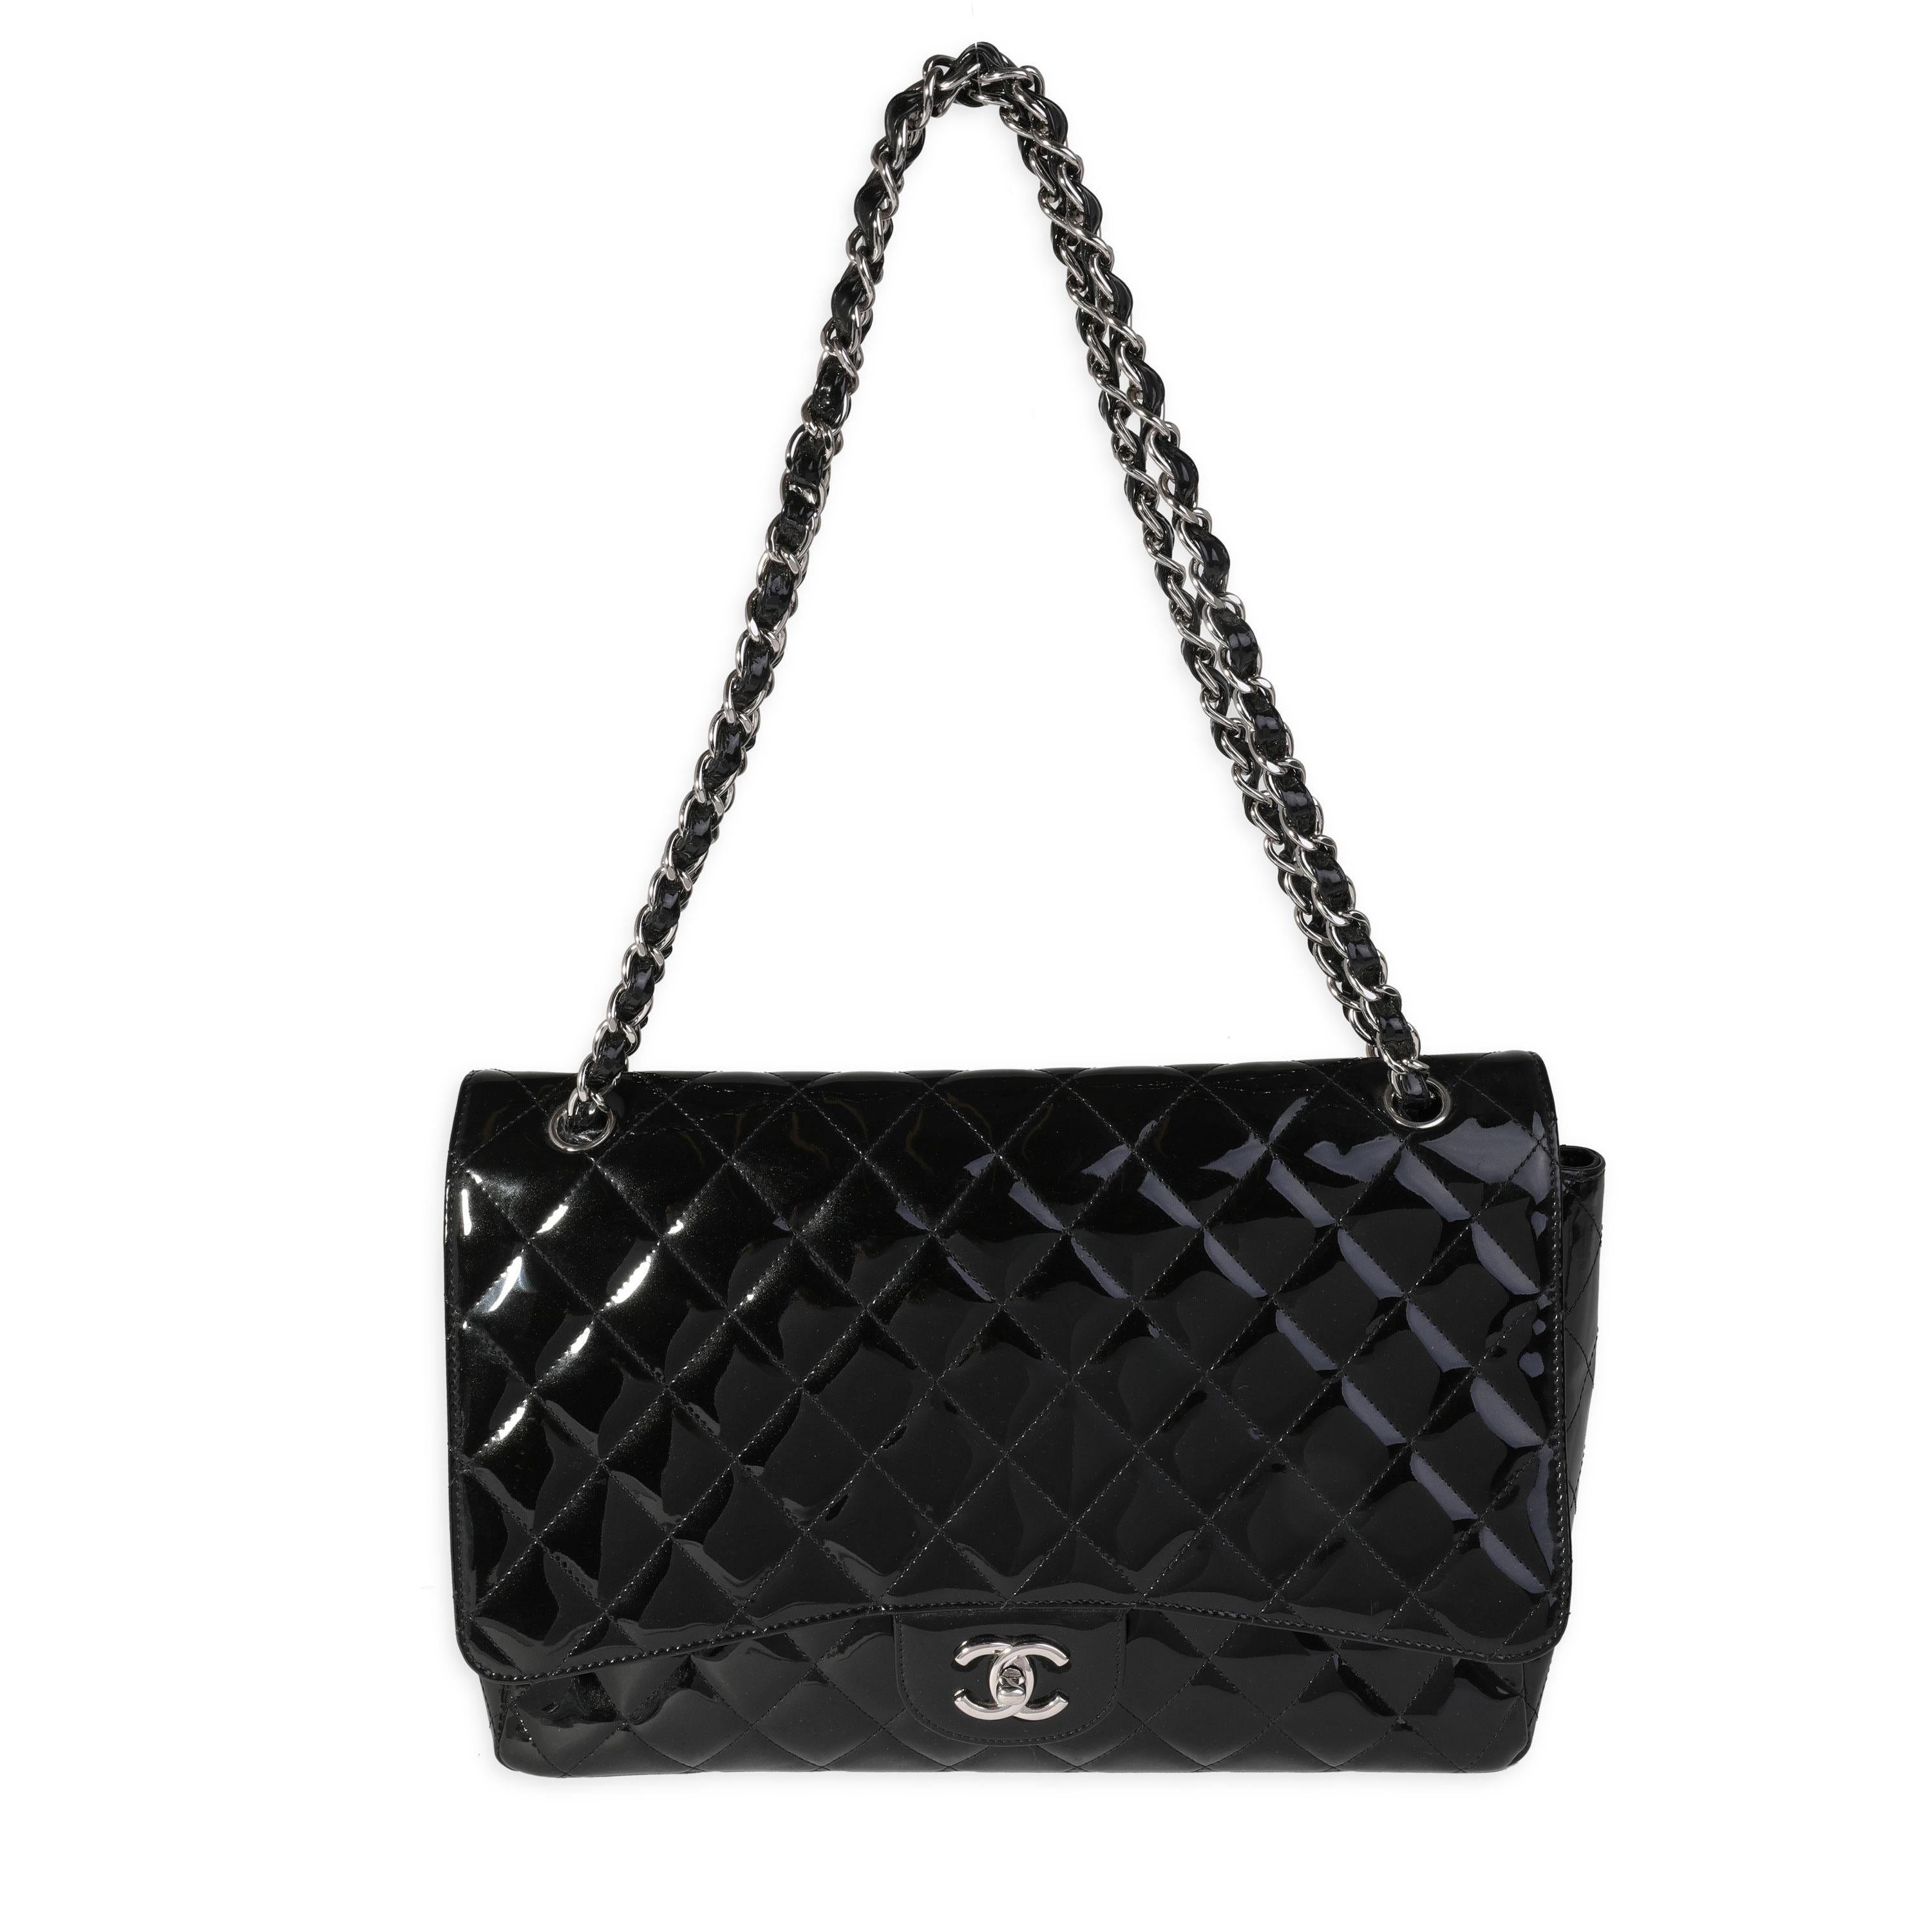 Listing Title: Chanel Black Quilted Patent Leather Maxi Classic Single Flap Bag
SKU: 121673
MSRP: 10000.00
Condition: Pre-owned 
Handbag Condition: Very Good
Condition Comments: Very Good Condition. Light scuffing to corners and throughout exterior.